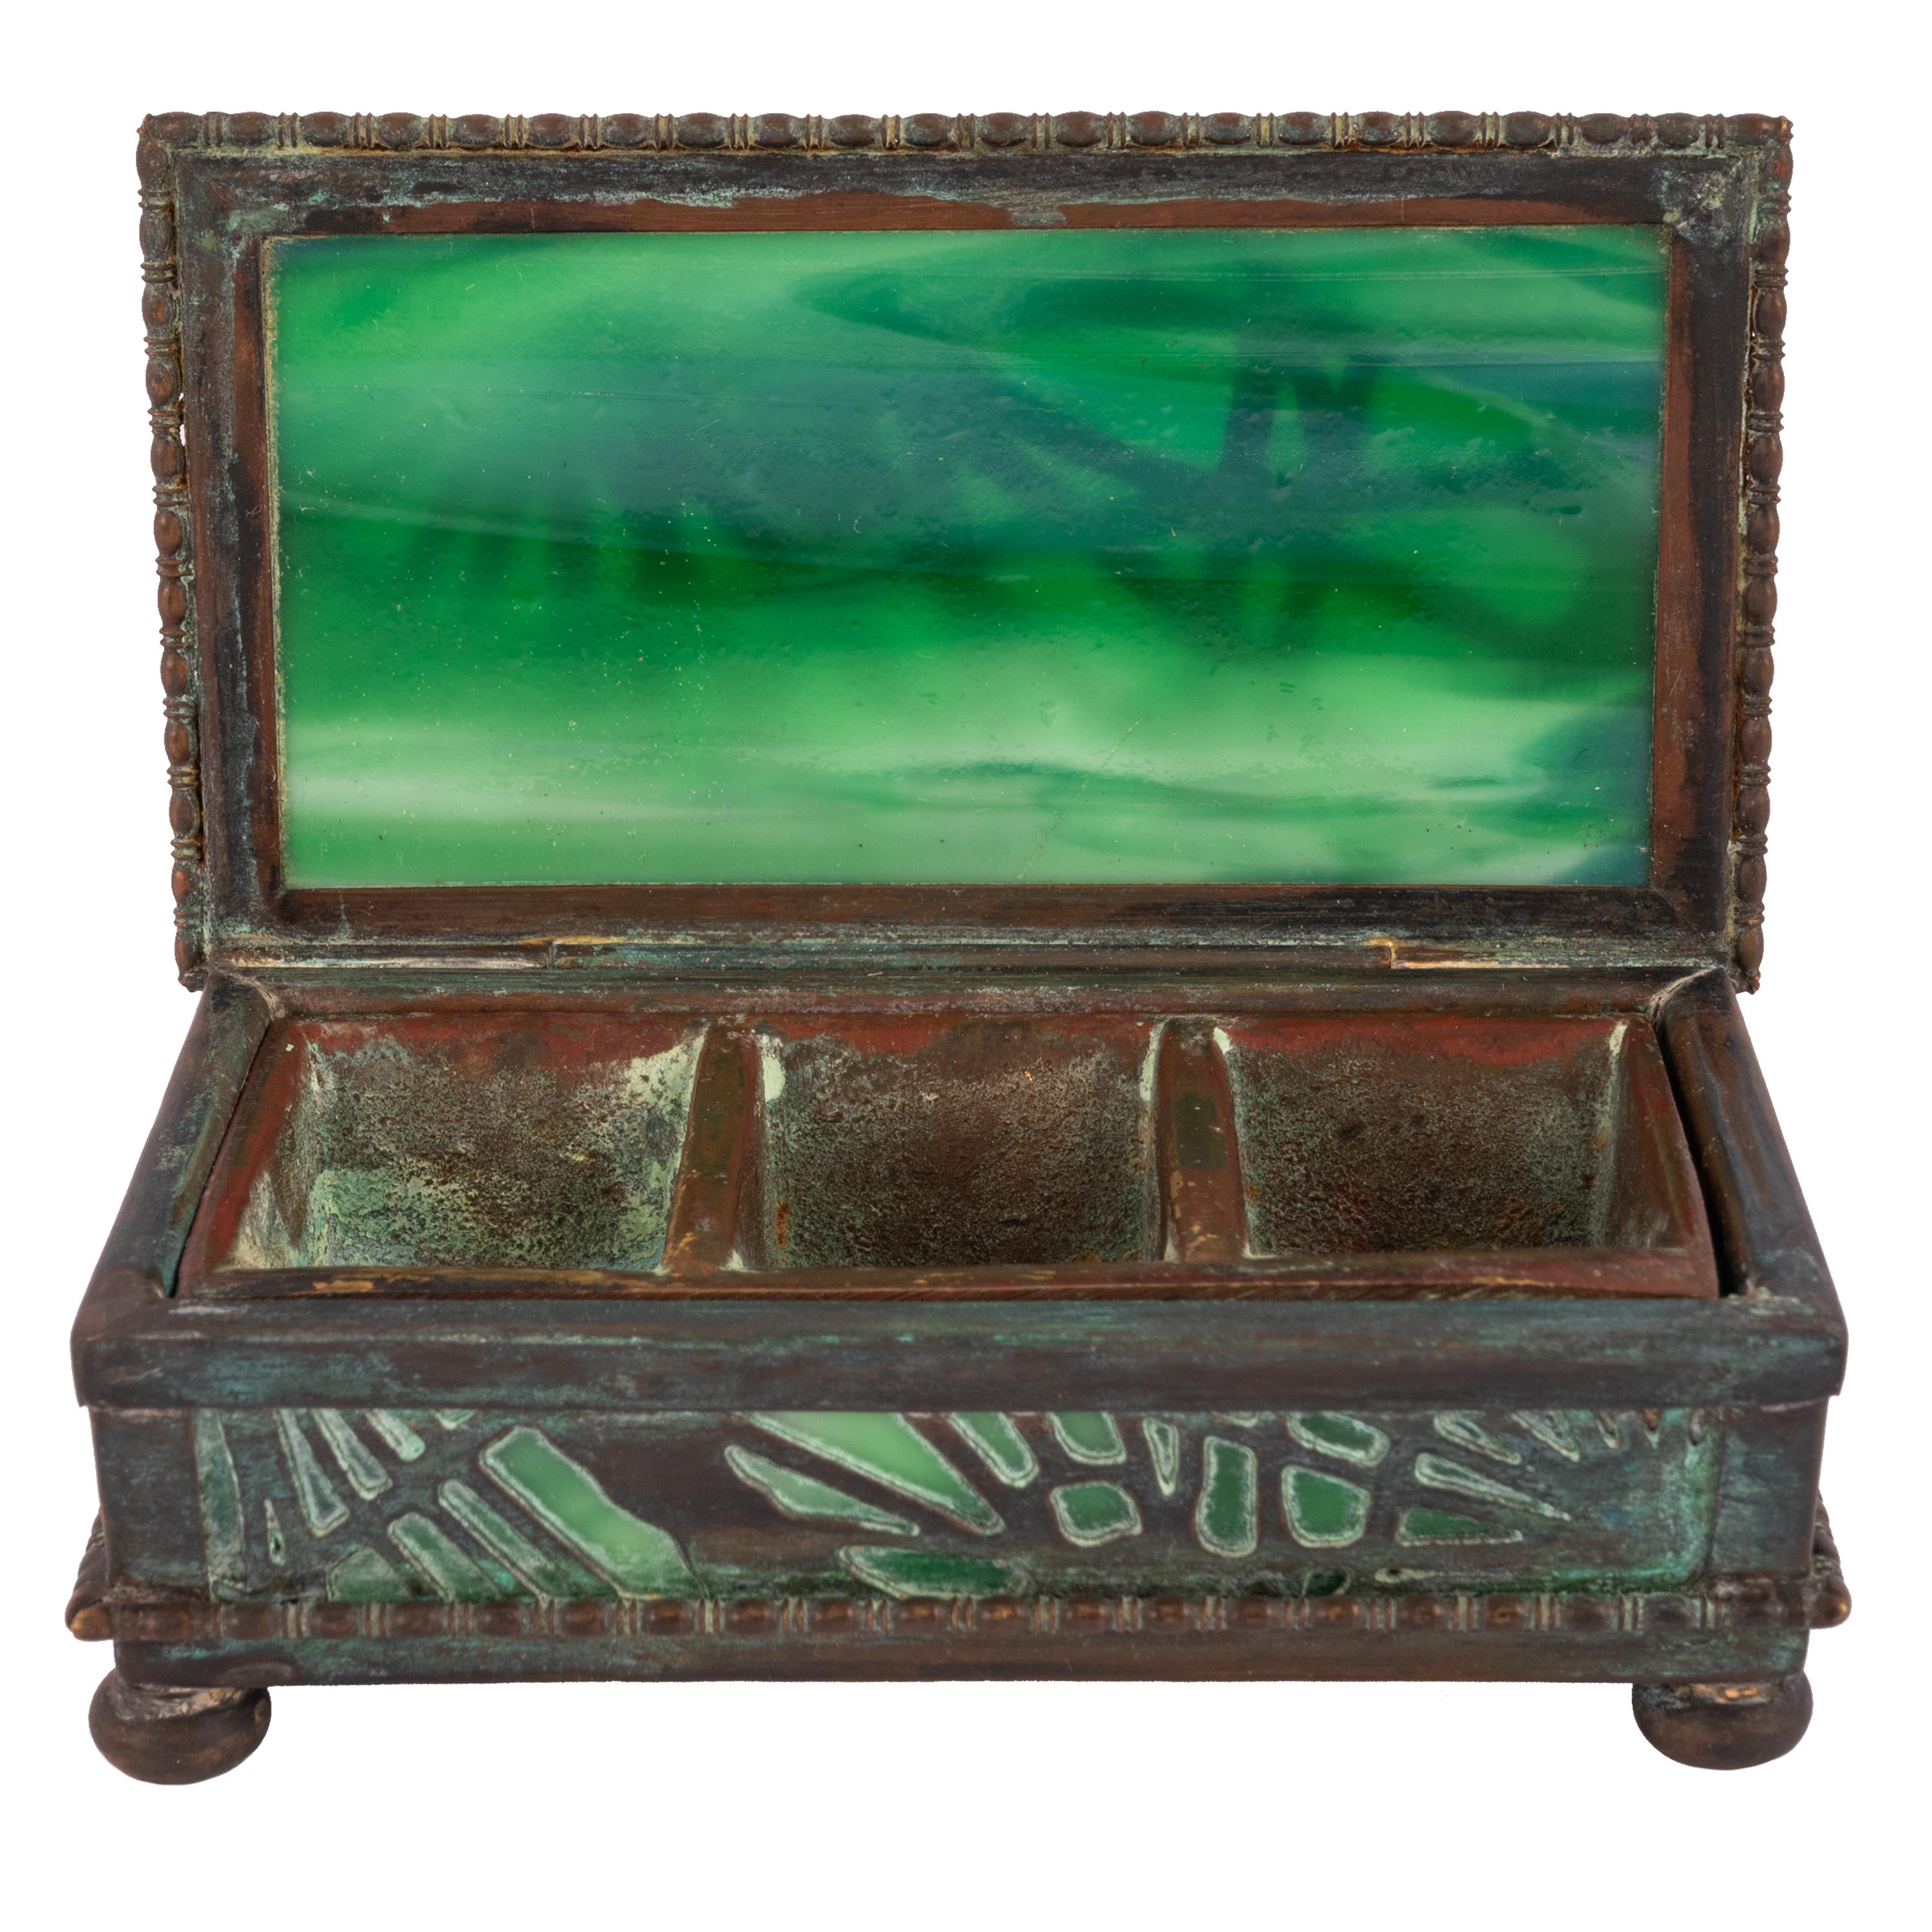 Antique Art Nouveau Tiffany & Co bronze and slag glass 'Pine Needles' desk set stamp box, circa 1910.
The box with a hinged lid and containing the original liner for storing stamps, the box lined with a vibrant green iridescent slag glass. The box